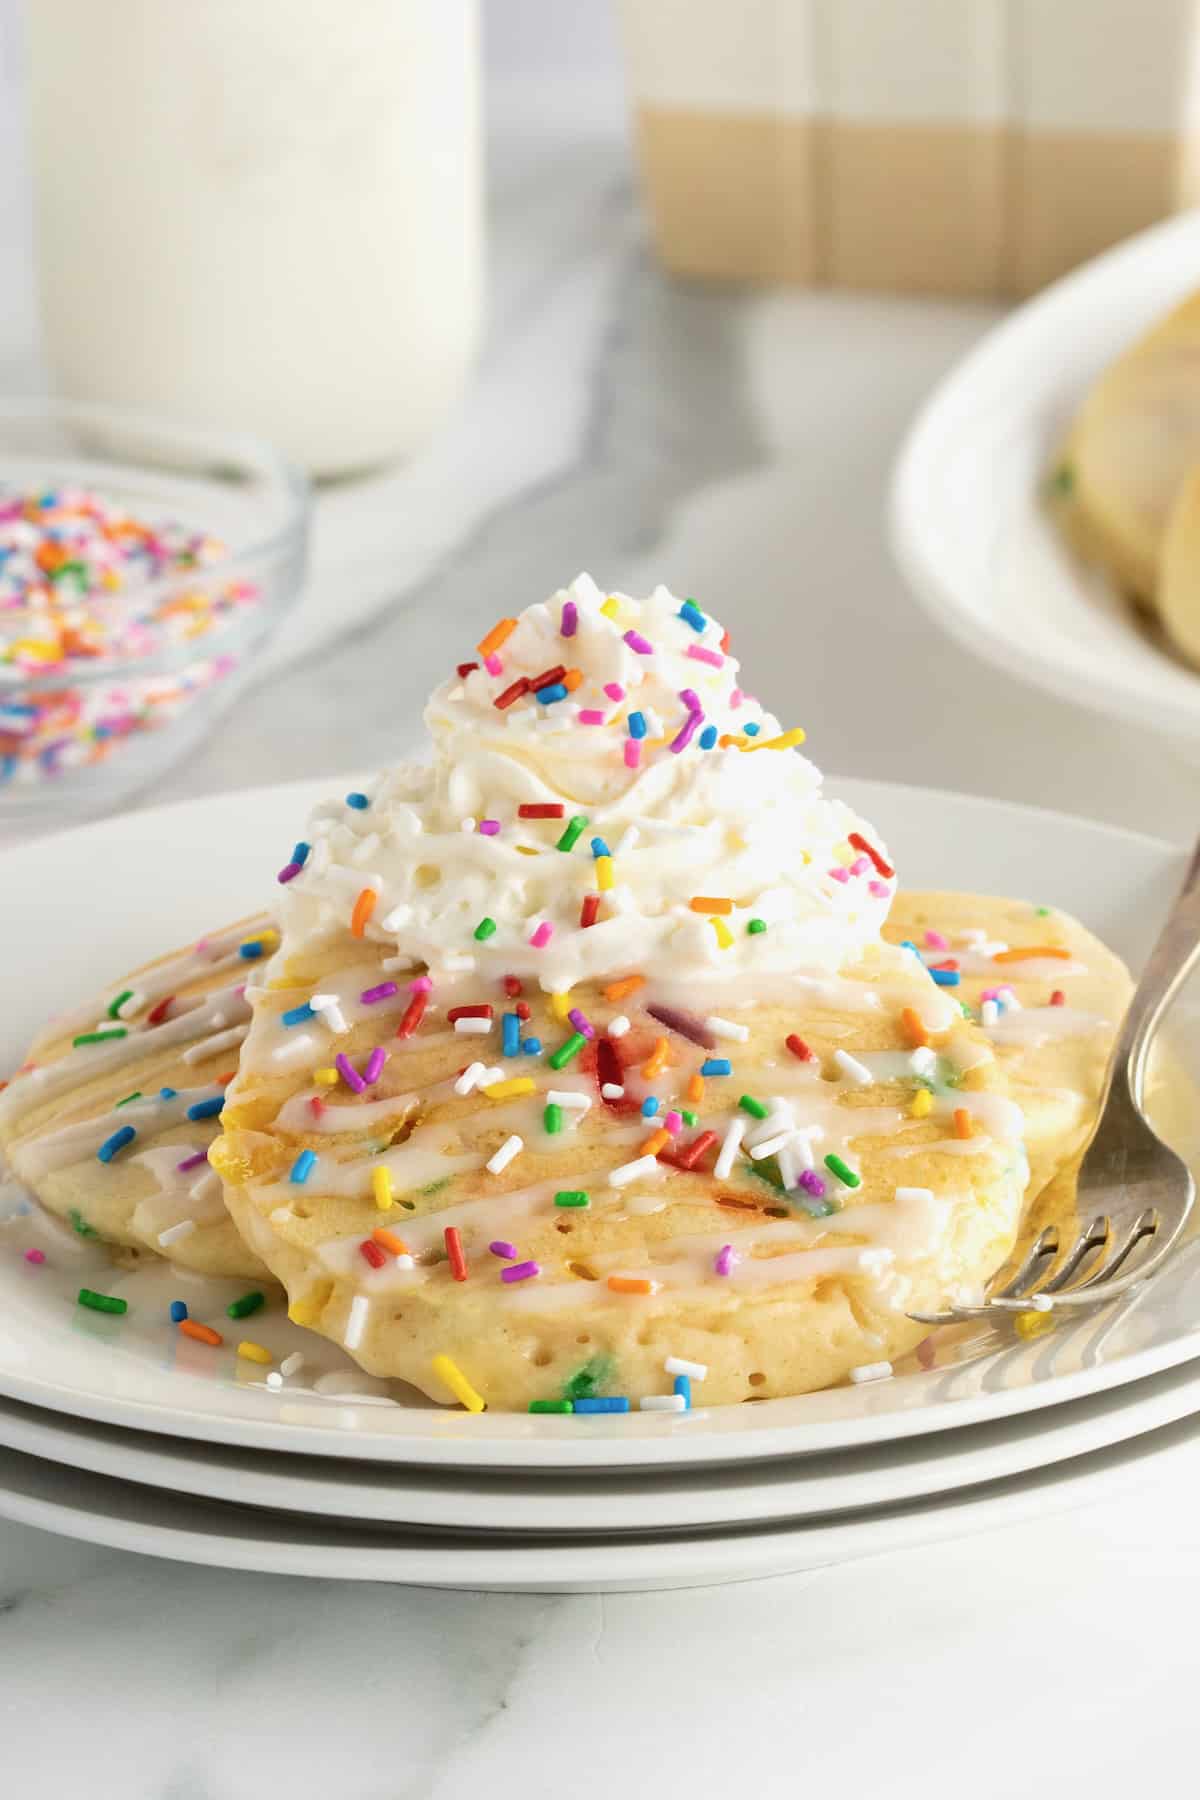 Buttermilk pancakes with colorful confetti sprinkles, topped with whipped cream and more sprinkles.